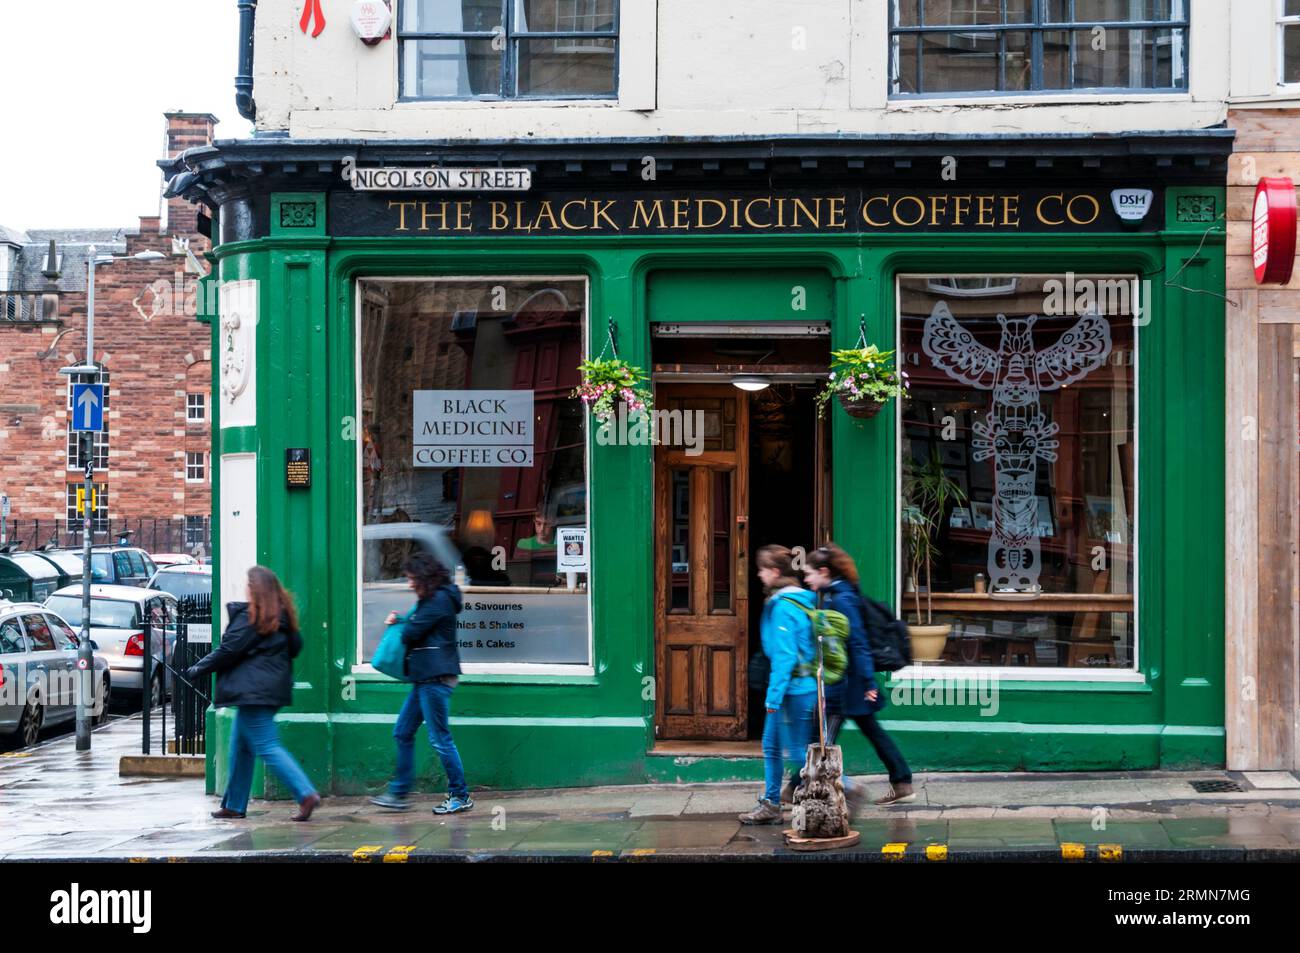 The Black Medicine Coffee Co in Nicolson Street, Edinburgh.  Where J K Rowling wrote some early parts of the Harry Potter series of books. Stock Photo